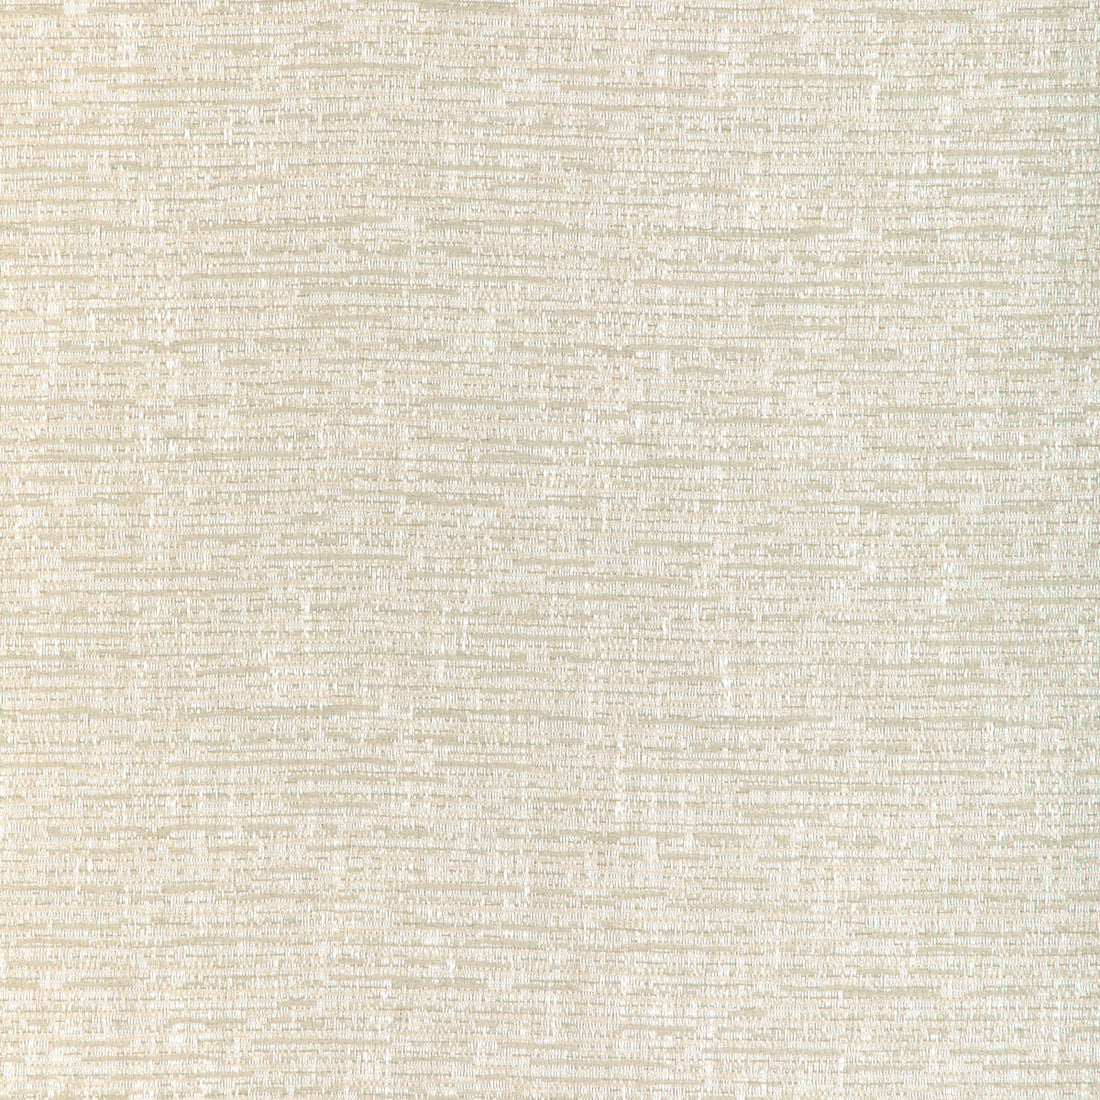 Bellows fabric in taupe color - pattern 37048.106.0 - by Kravet Design in the Thom Filicia Latitude collection